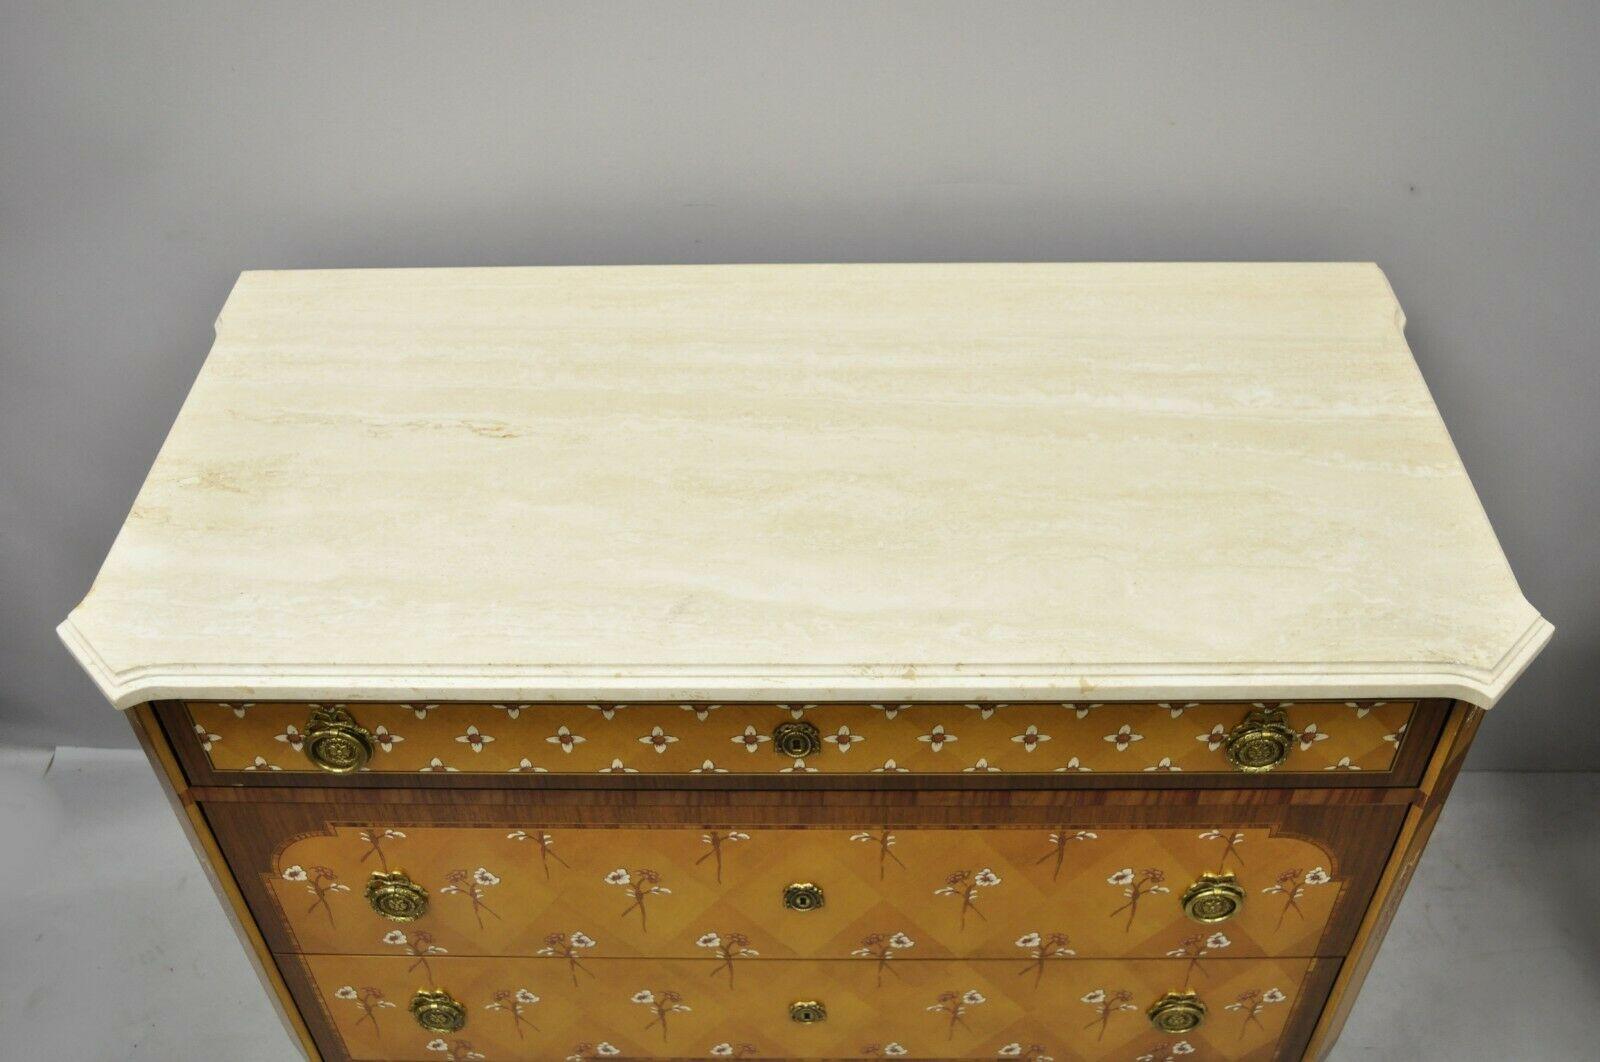 20th Century Pair Floral Painted Travertine Marble Top Commode Chest Dresser by E.J. Victor